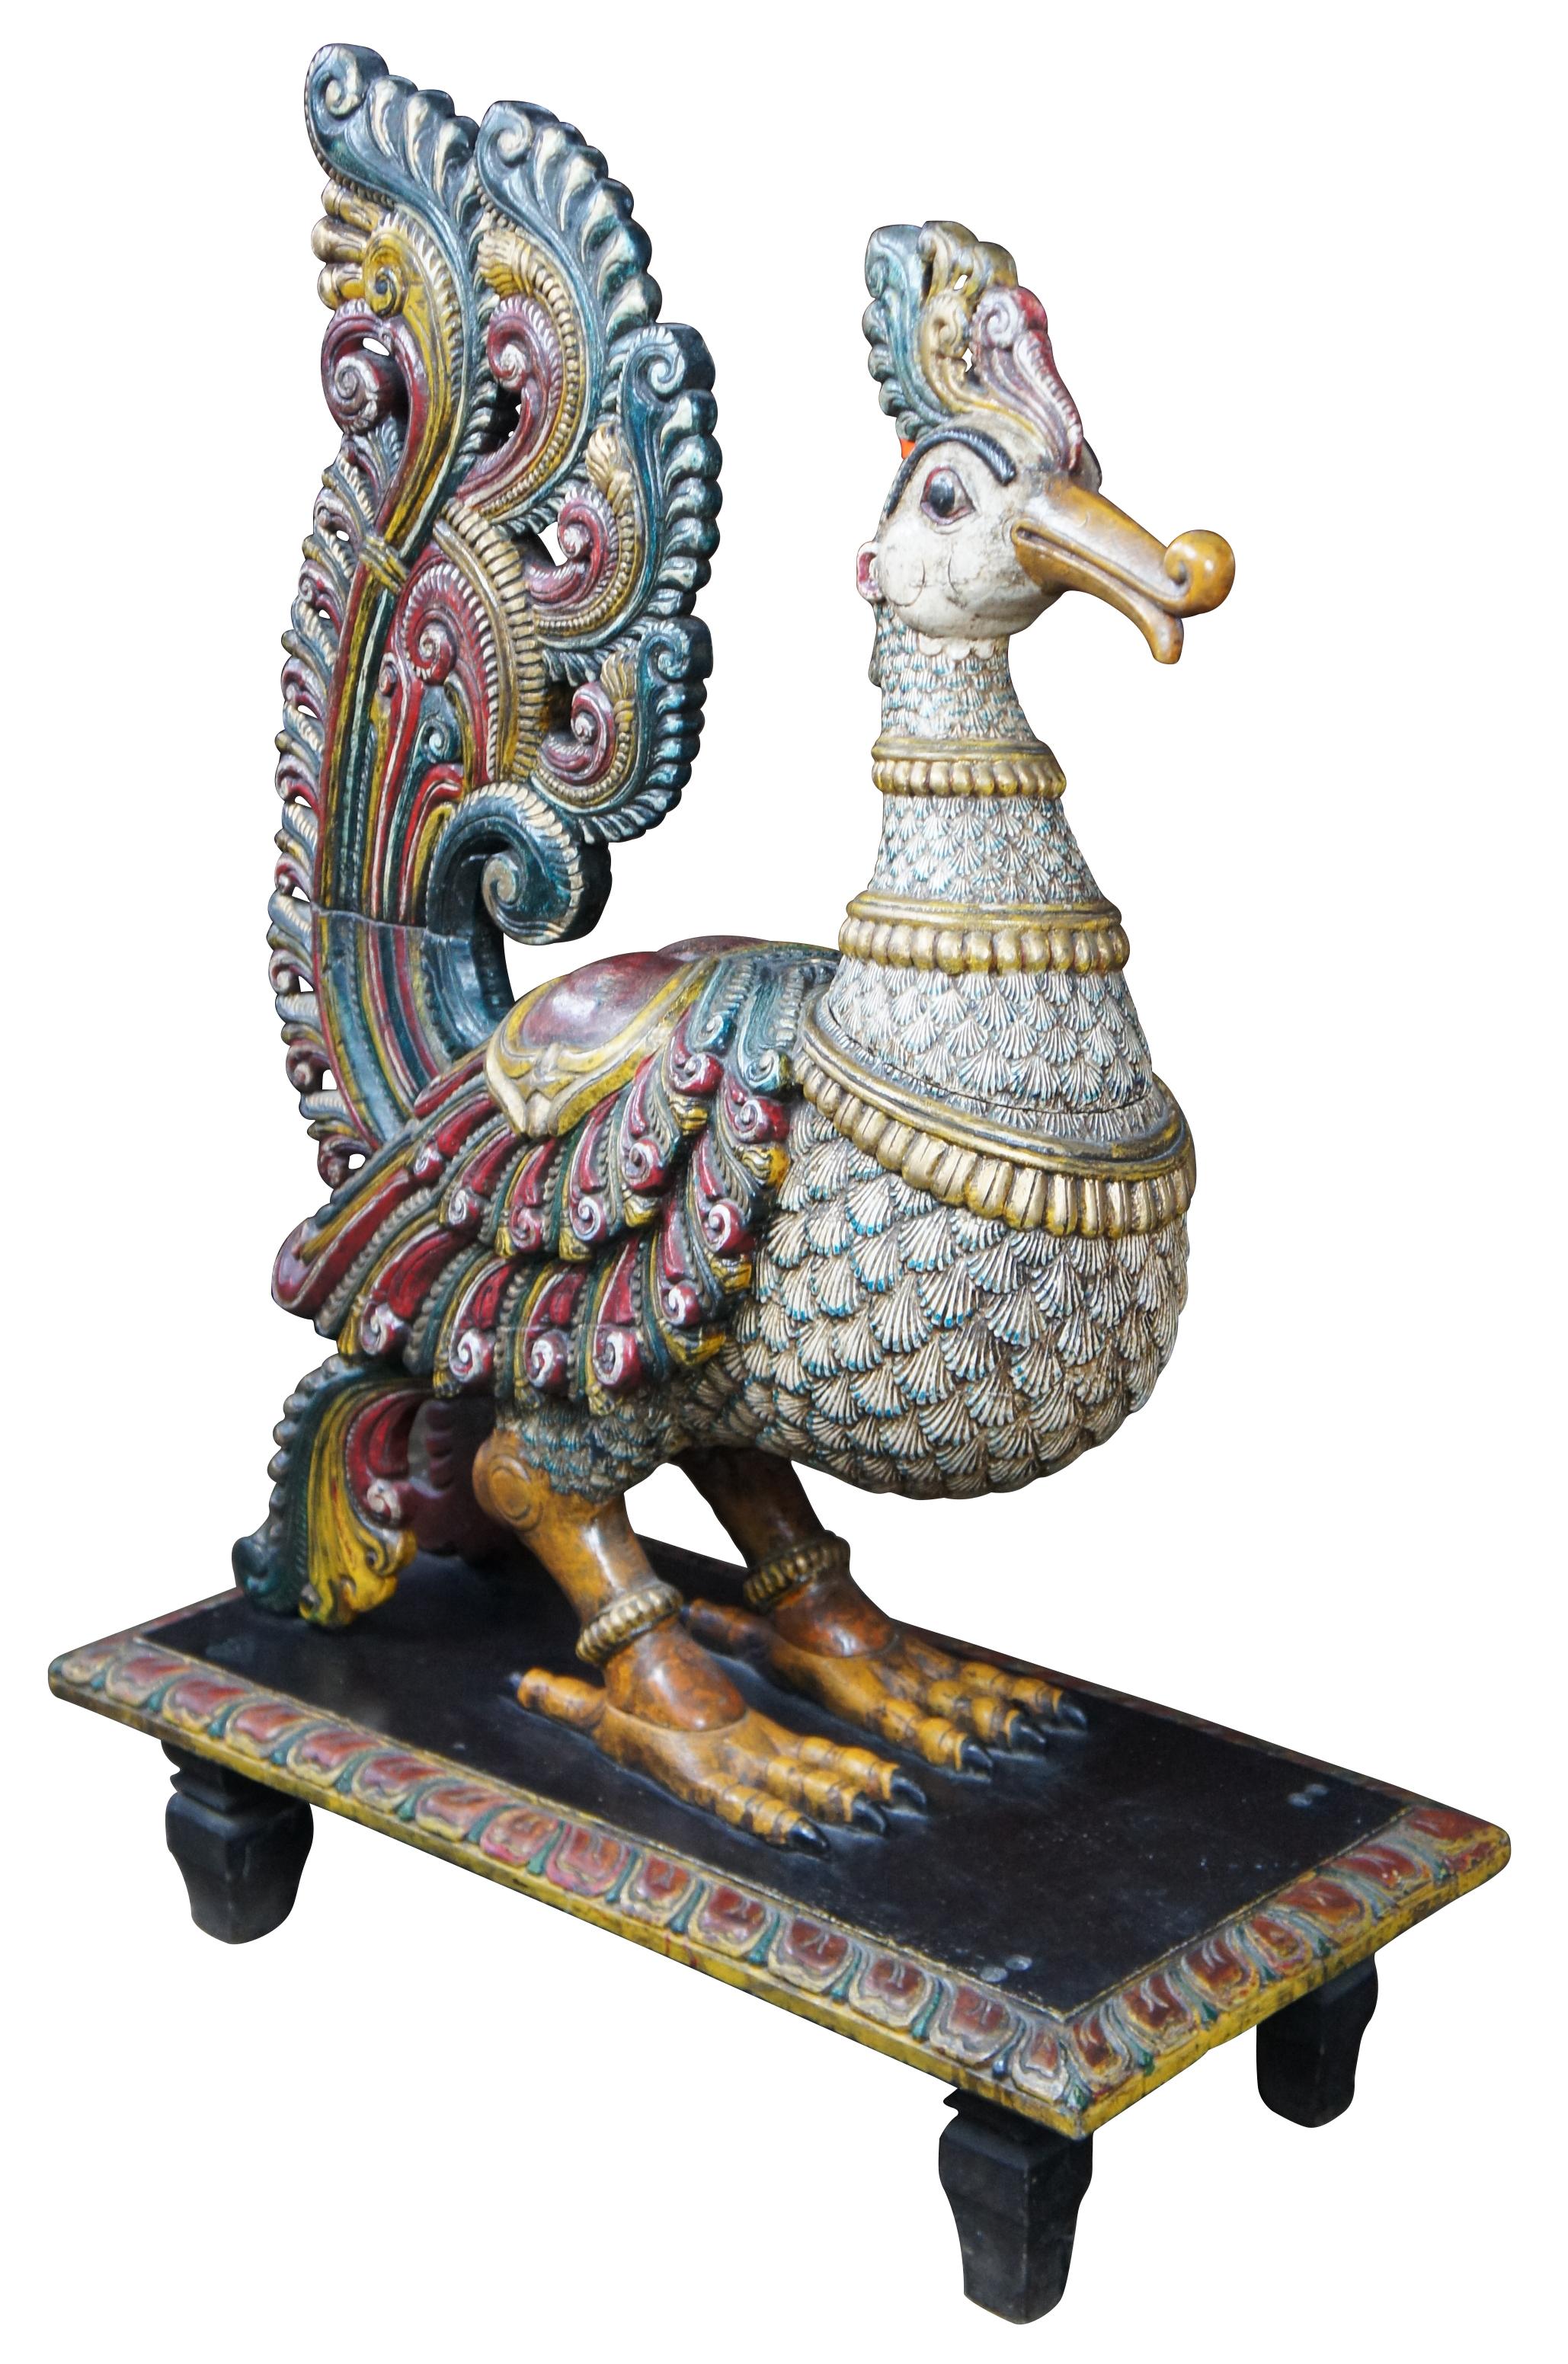 20th century South Indian carved and painted peacock statue. A Folk Art sculpture hand carved on a plinth base. Features bright colors of yellow, green, red and orange. A large sculpture with an eye catching presence on a floor, table or outcove.